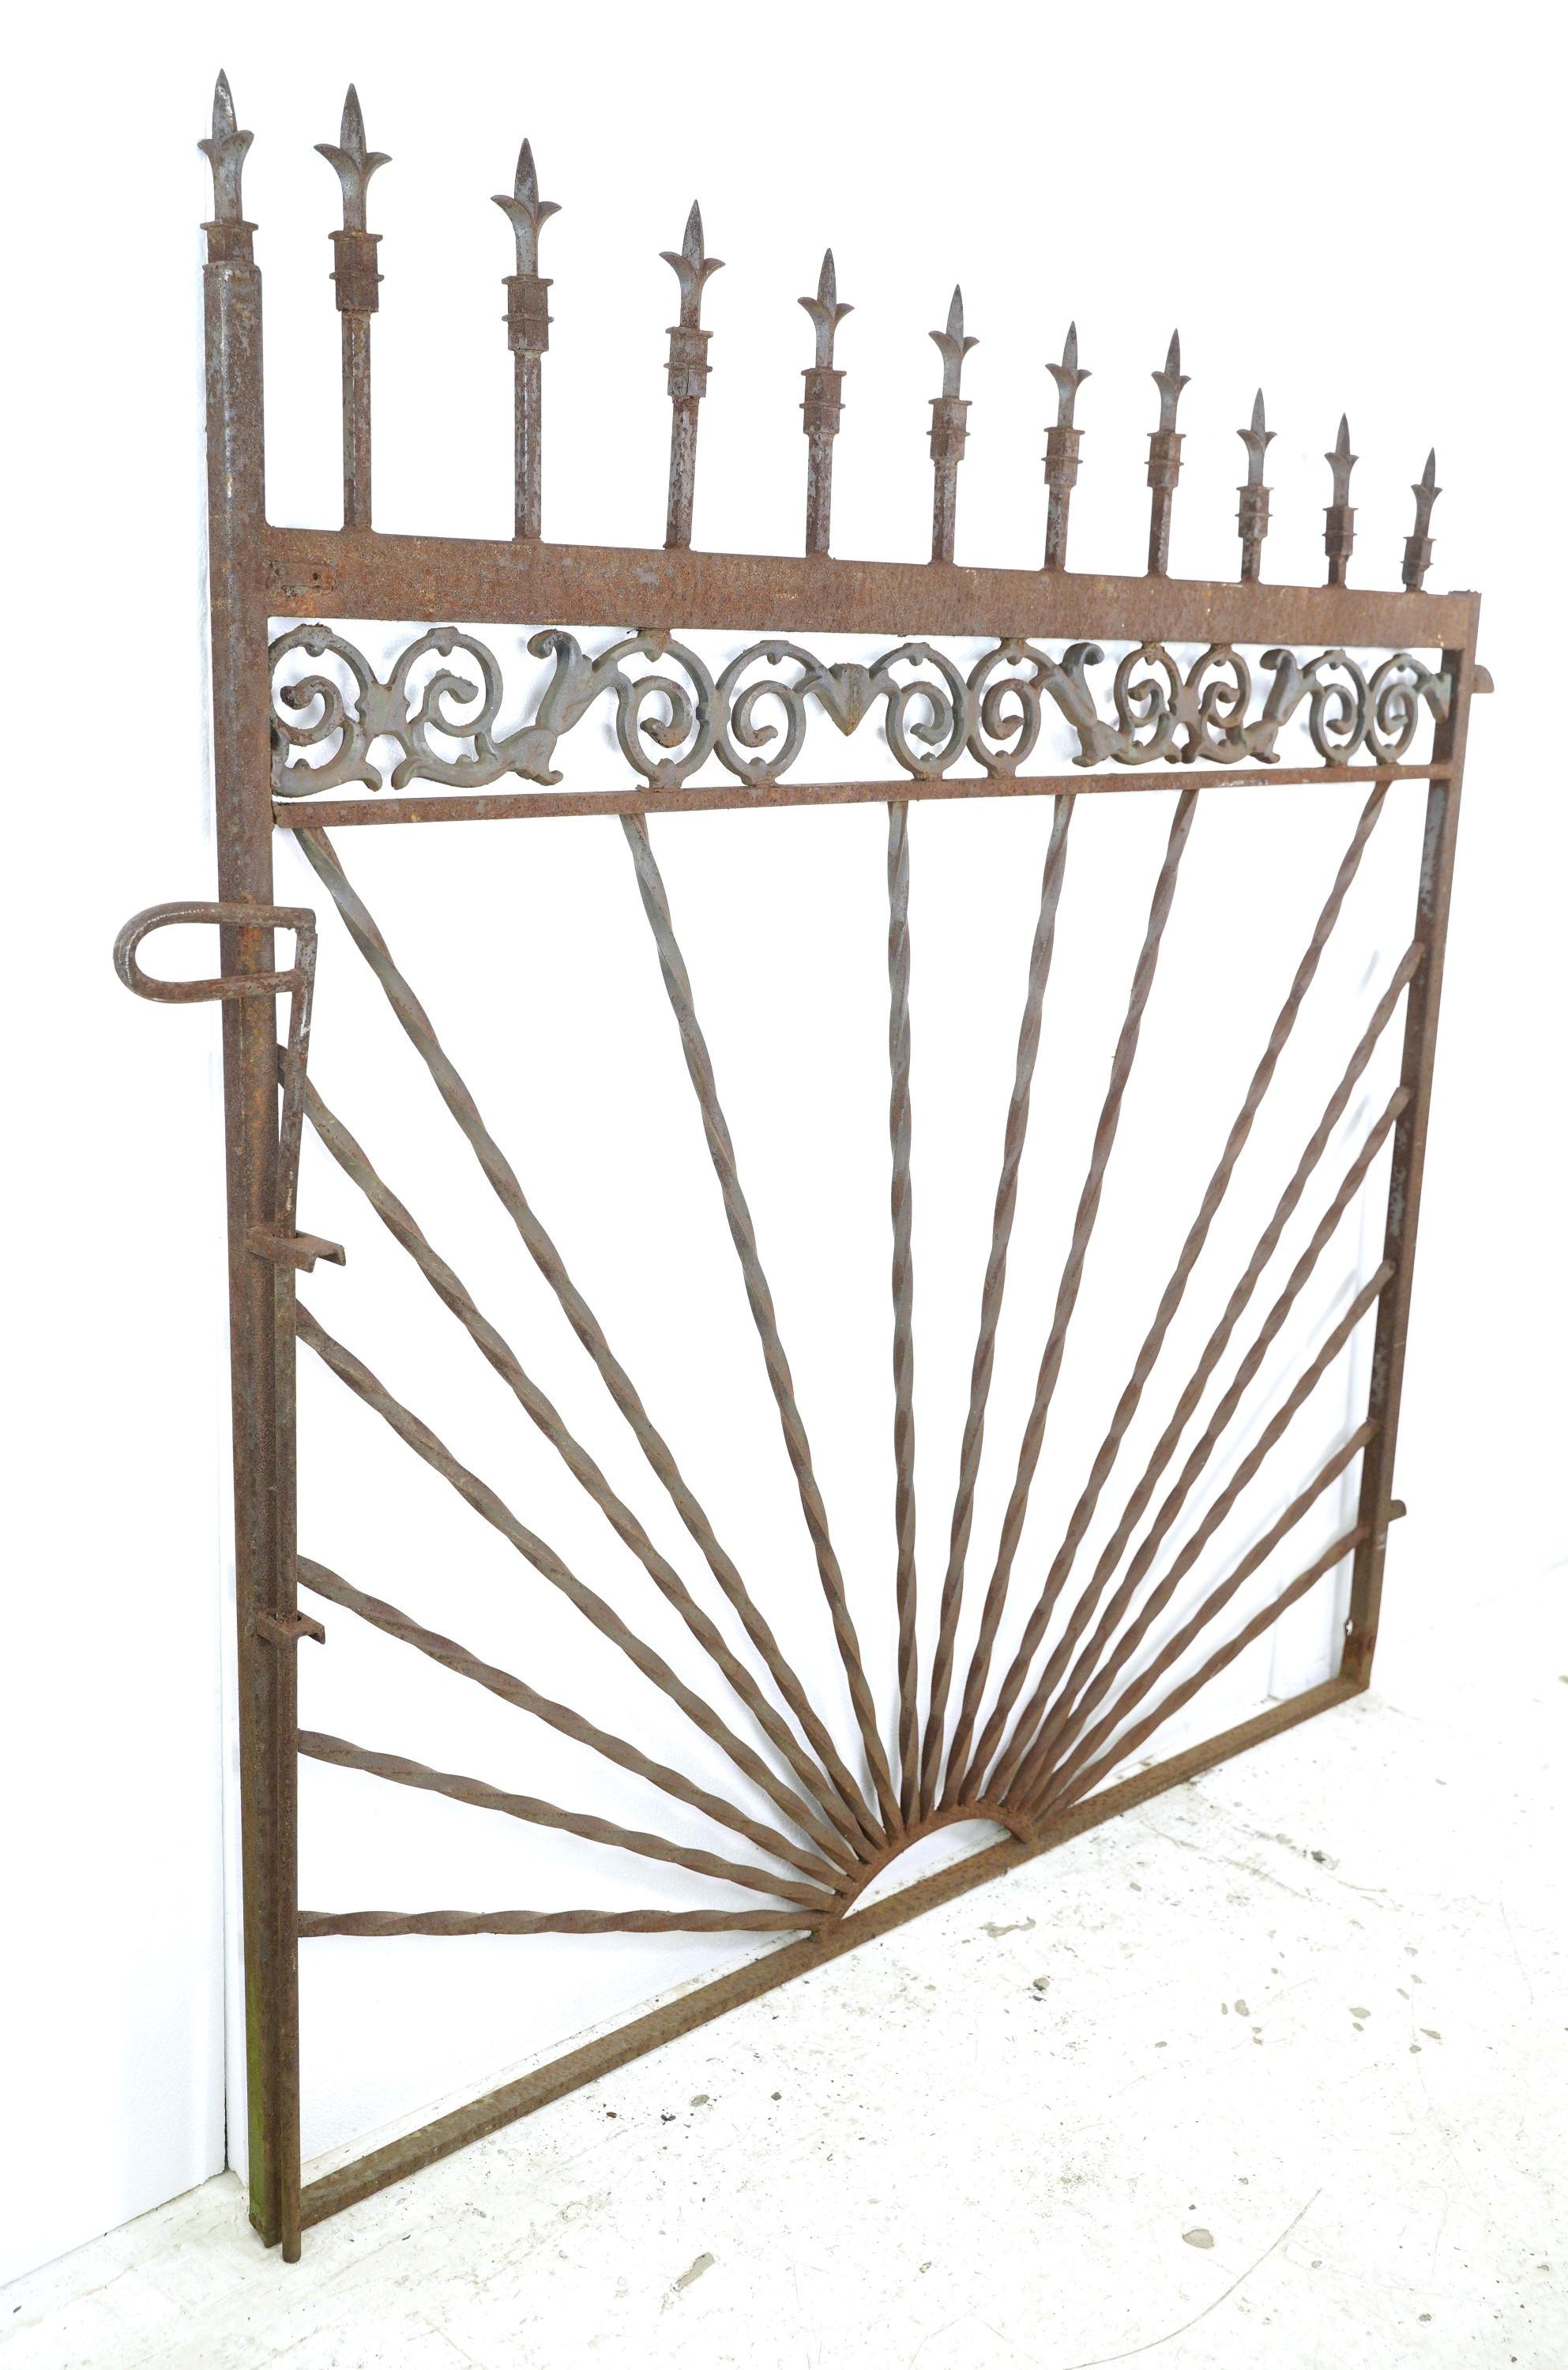 Twisted wrought iron spindles and cast iron scrolls and finials wielded together make up this decorative garden gate. Simply install it in your desired outdoor area connecting to your existing fence. It serves as an entrance or barrier, providing